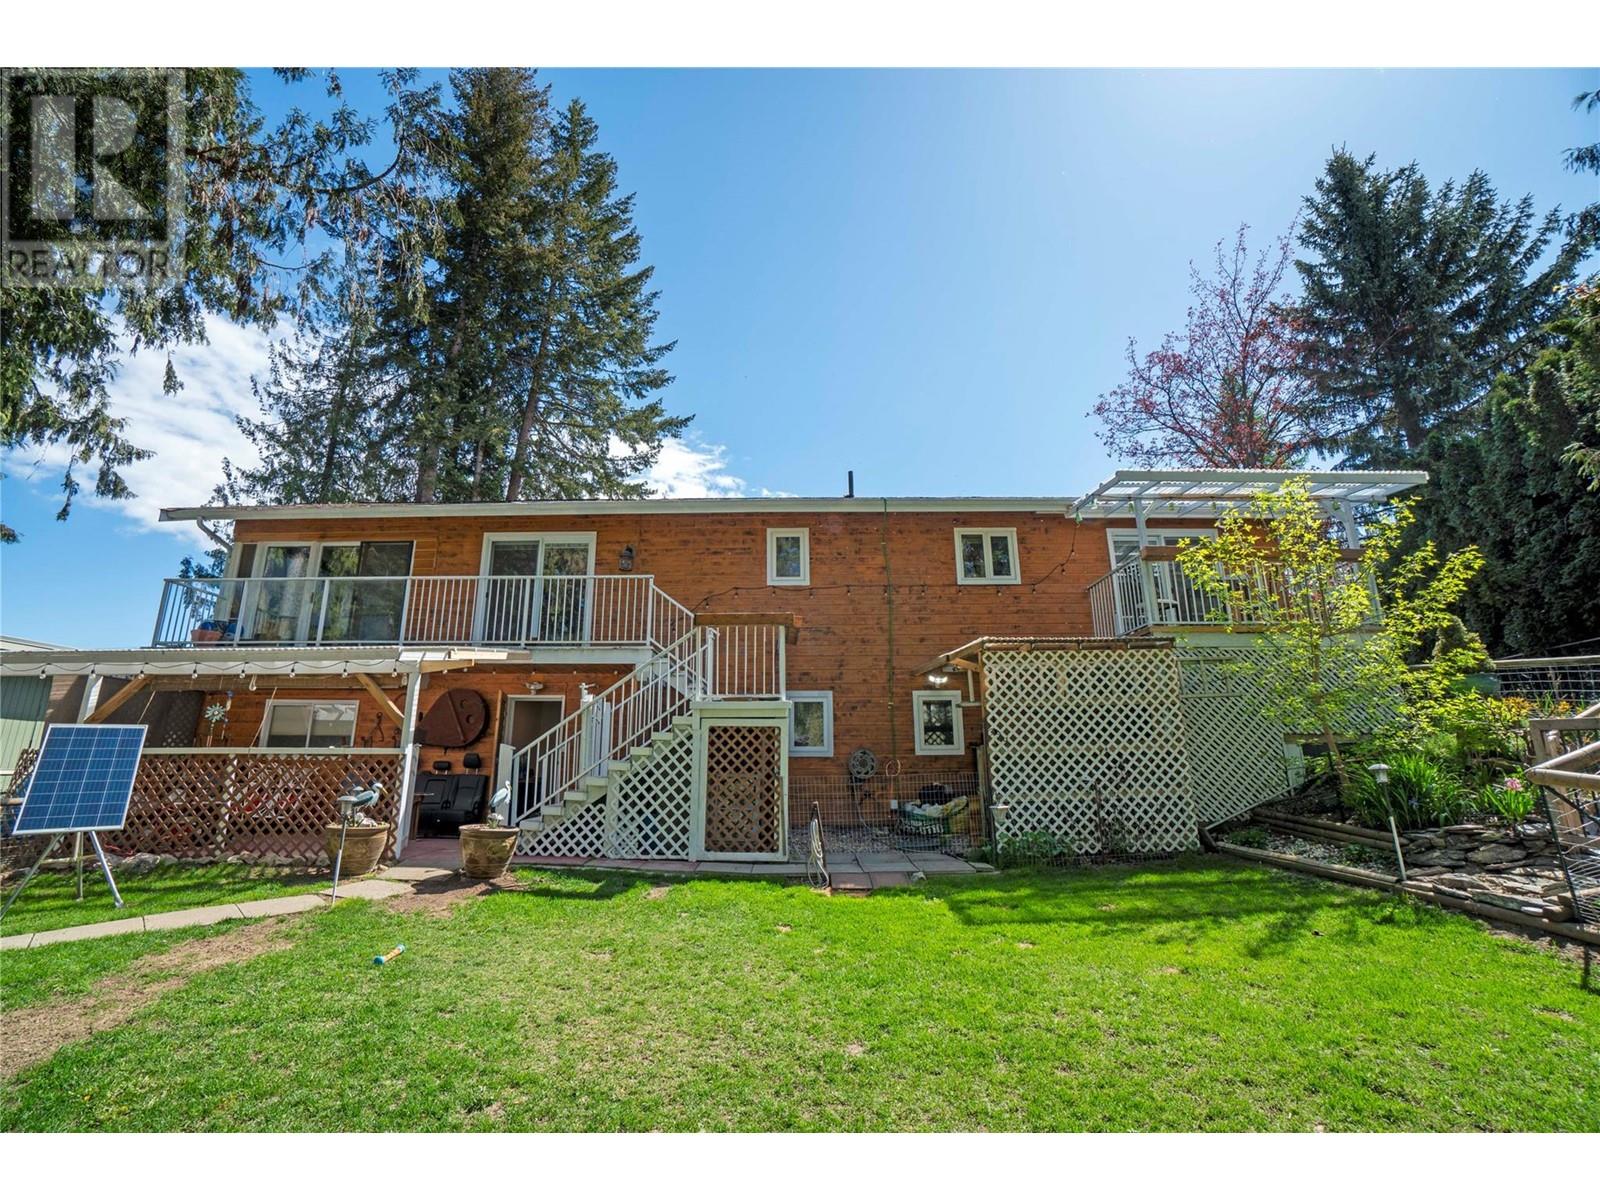  2363 Forest Drive, Blind Bay